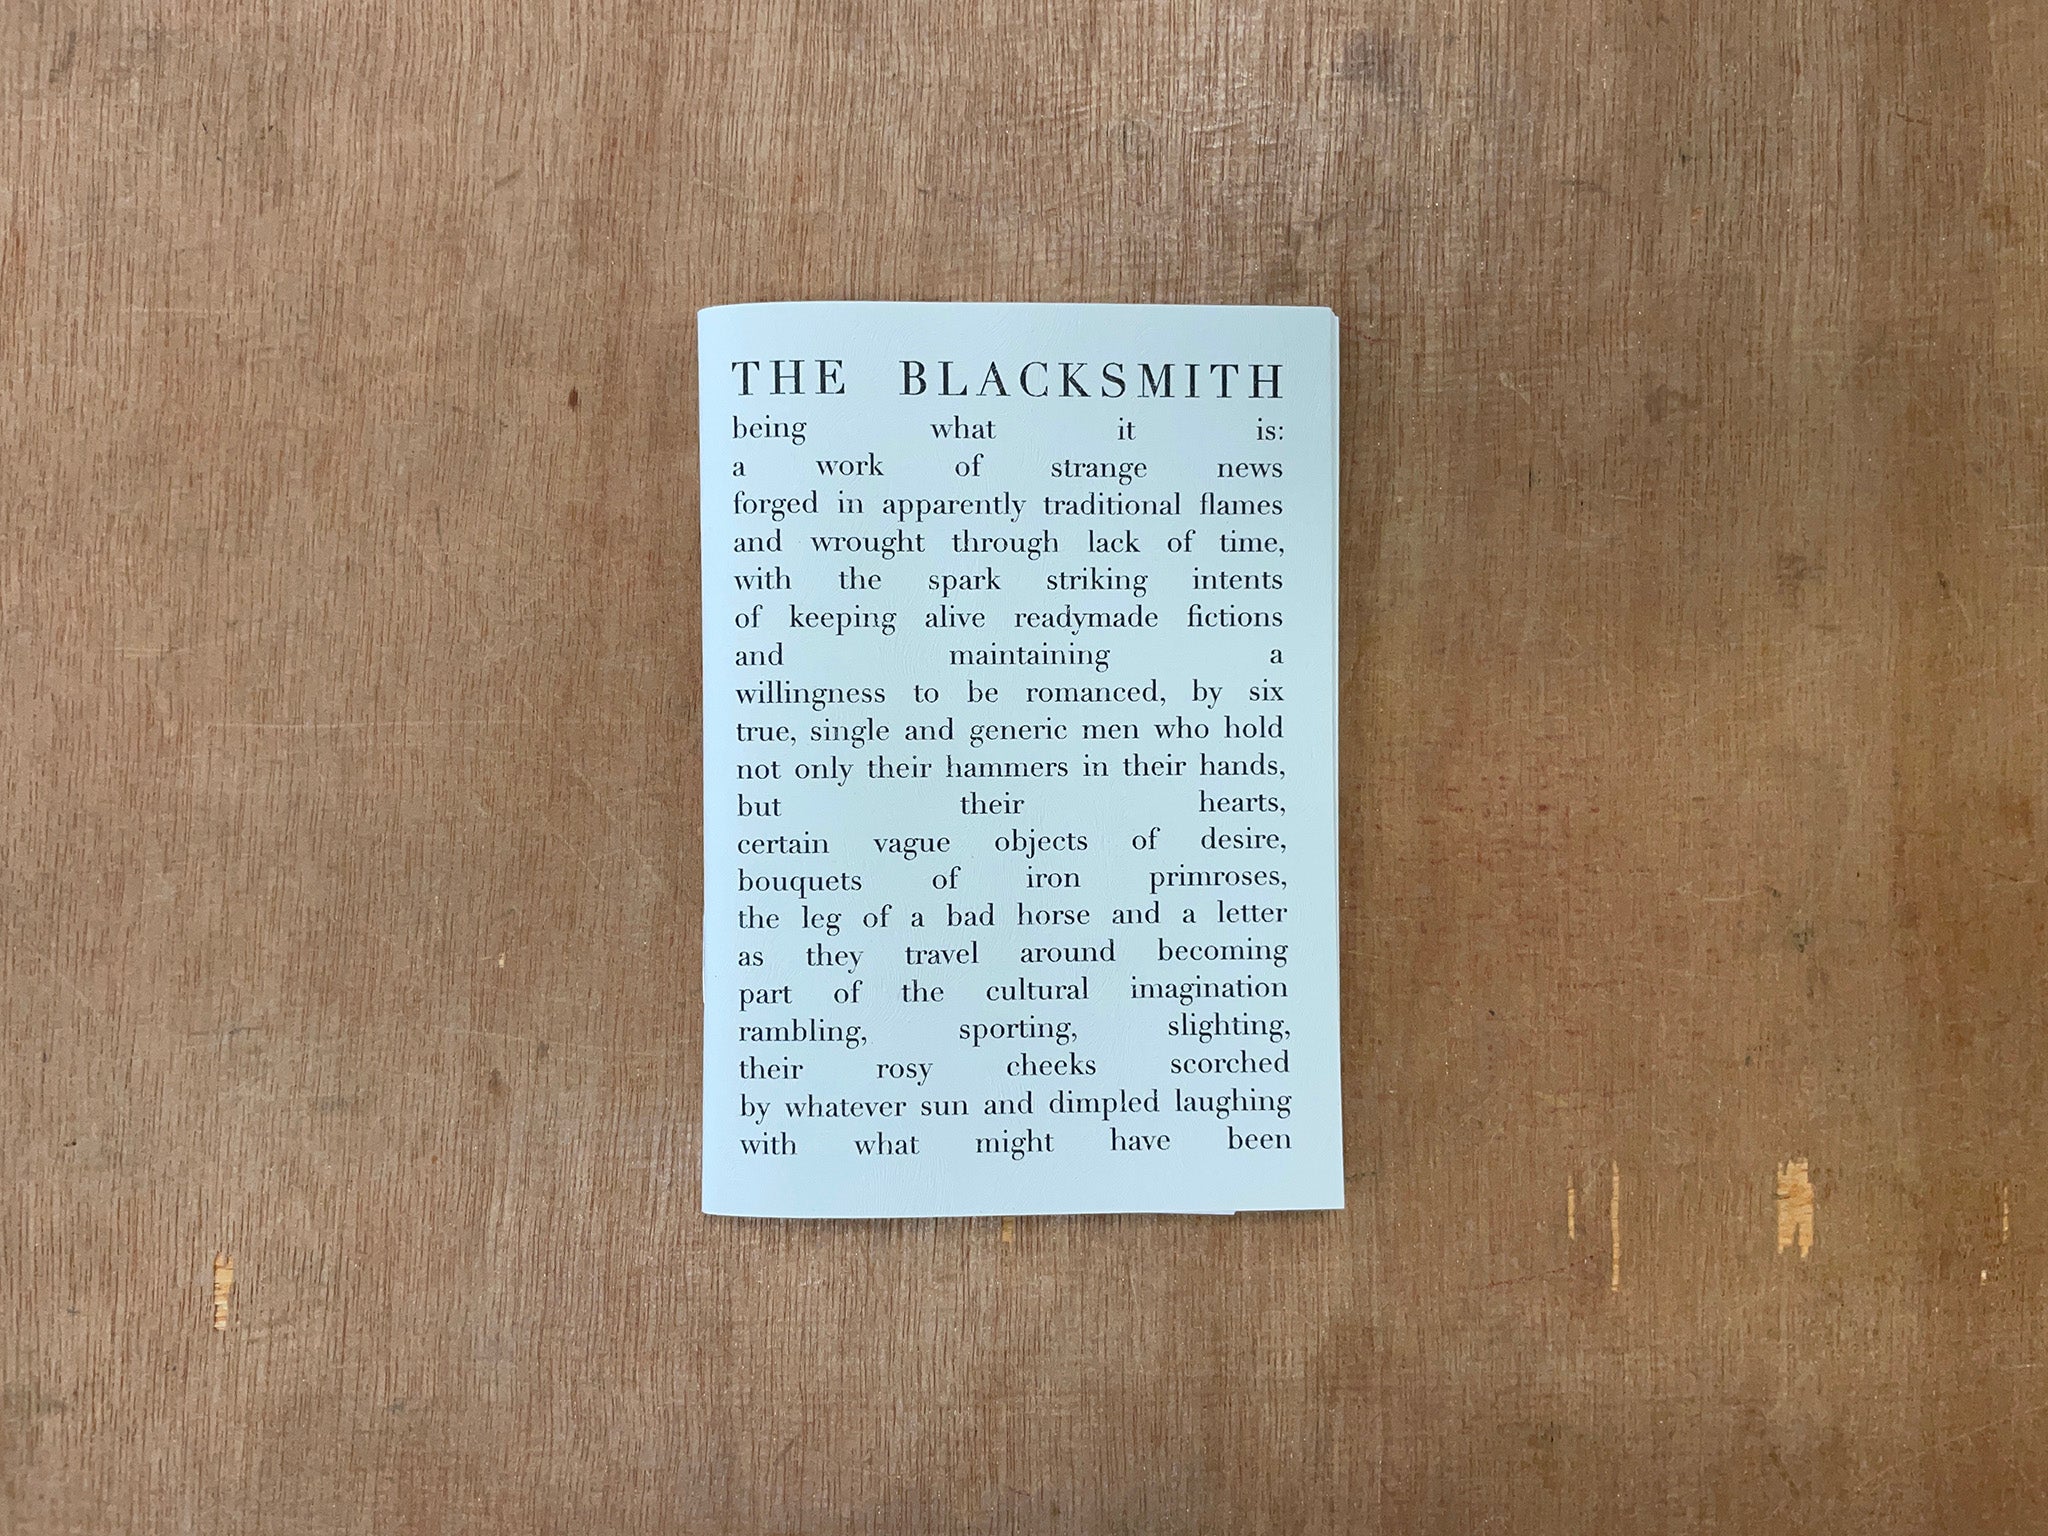 THE BLACKSMITH by Various Authors